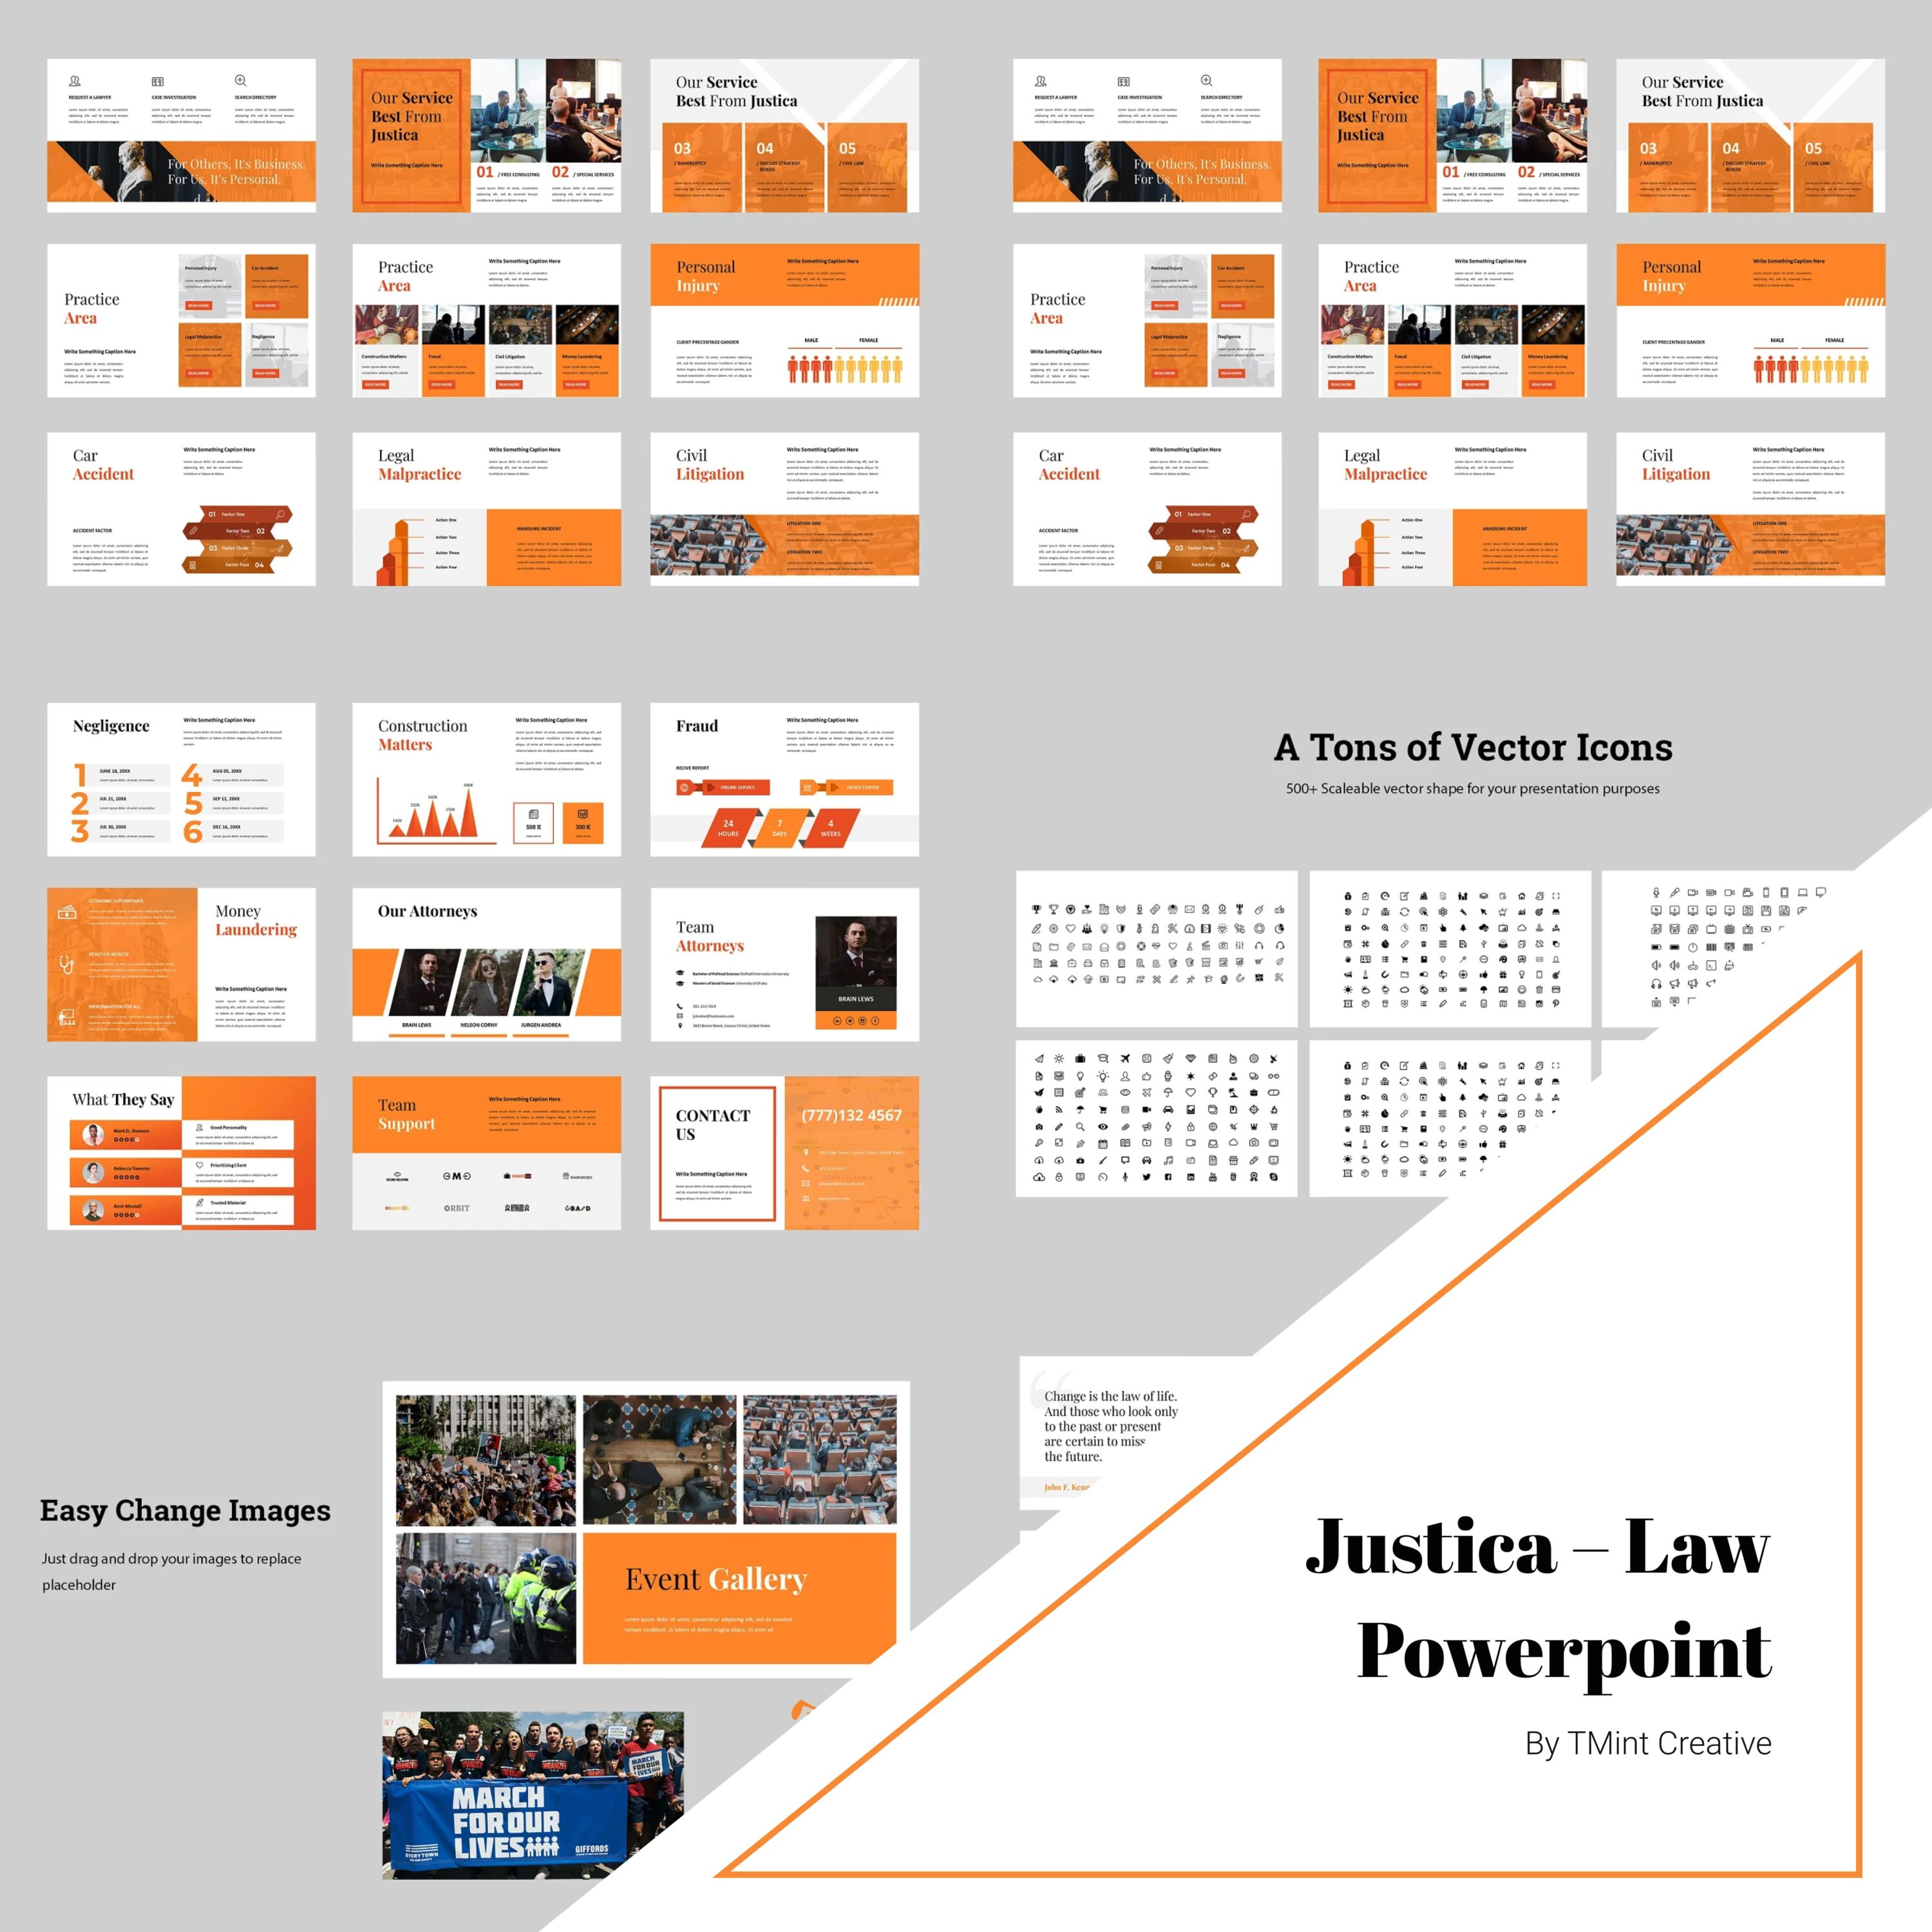 Justica Law Powerpoint 02.